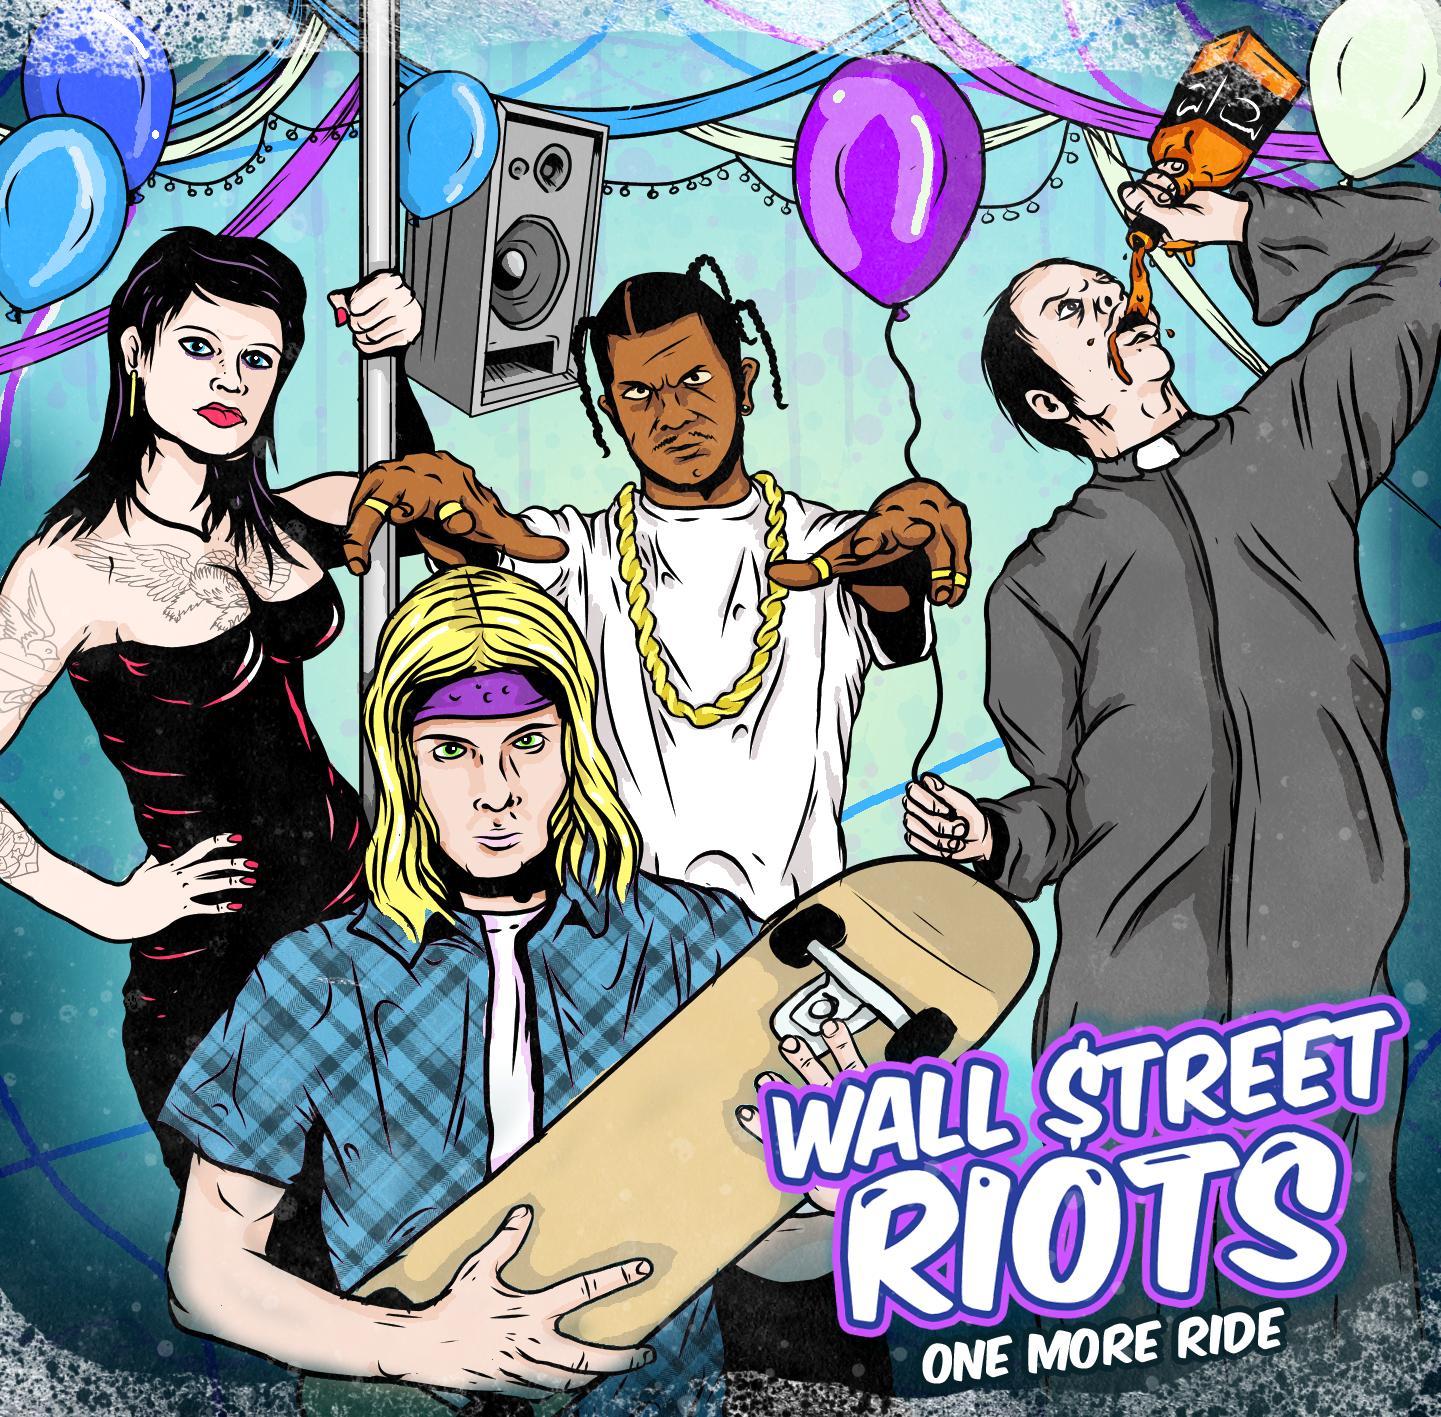 Wall Street Riots 'One More Ride'